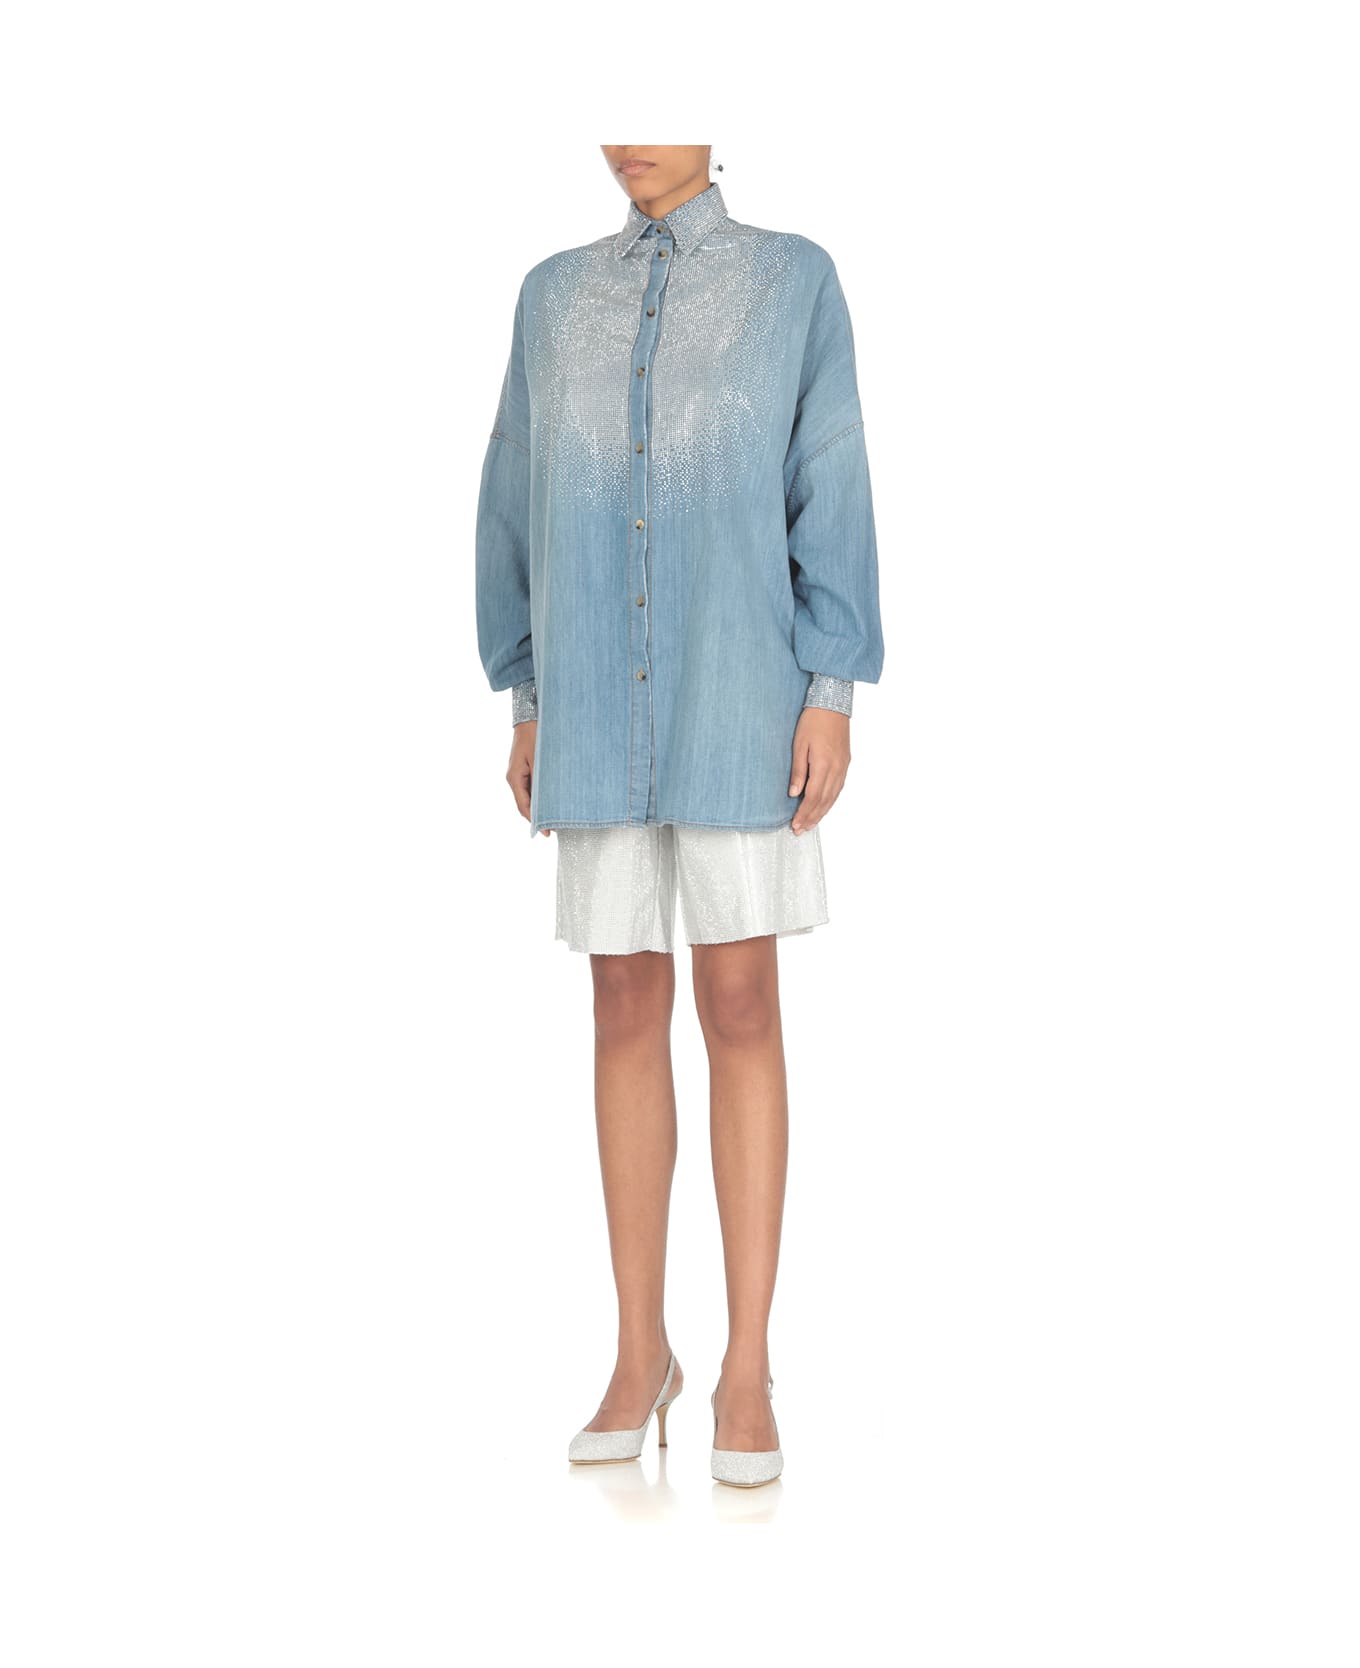 Ermanno Scervino Cotton Shirt With Strass - Light Blue